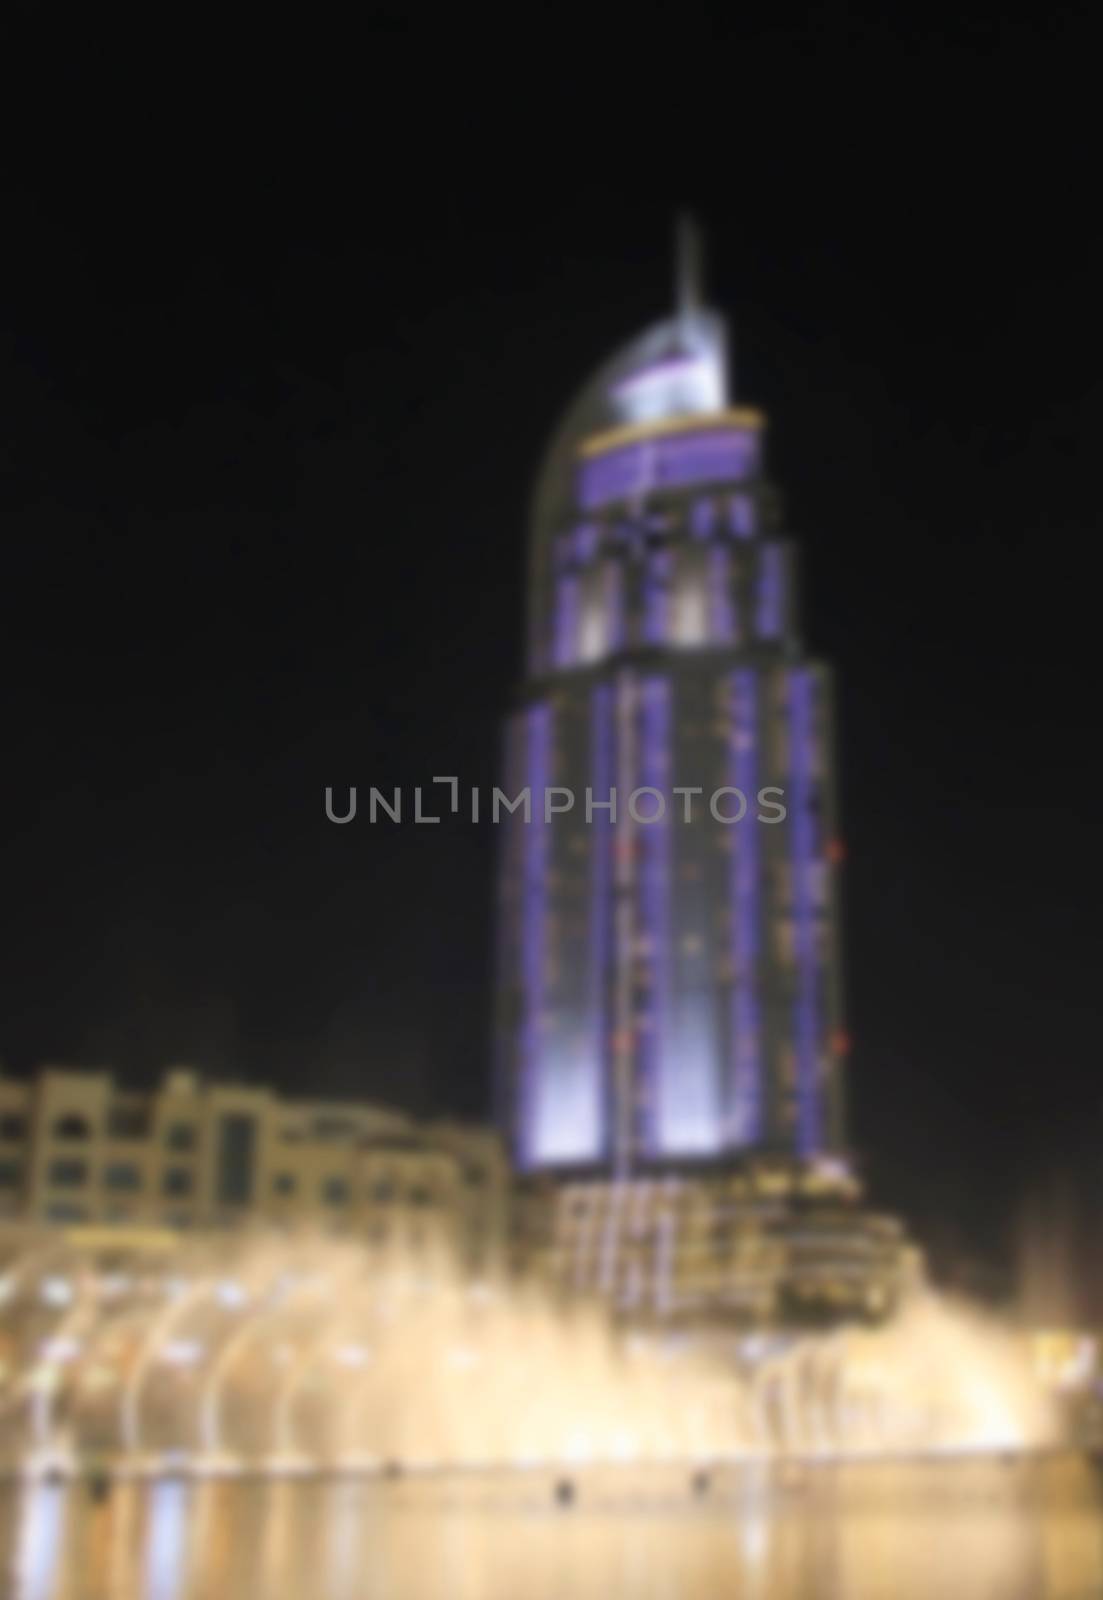 Dubai promenade singing fountains on the background of architecture, sunset April 7, 2014 is   blurred